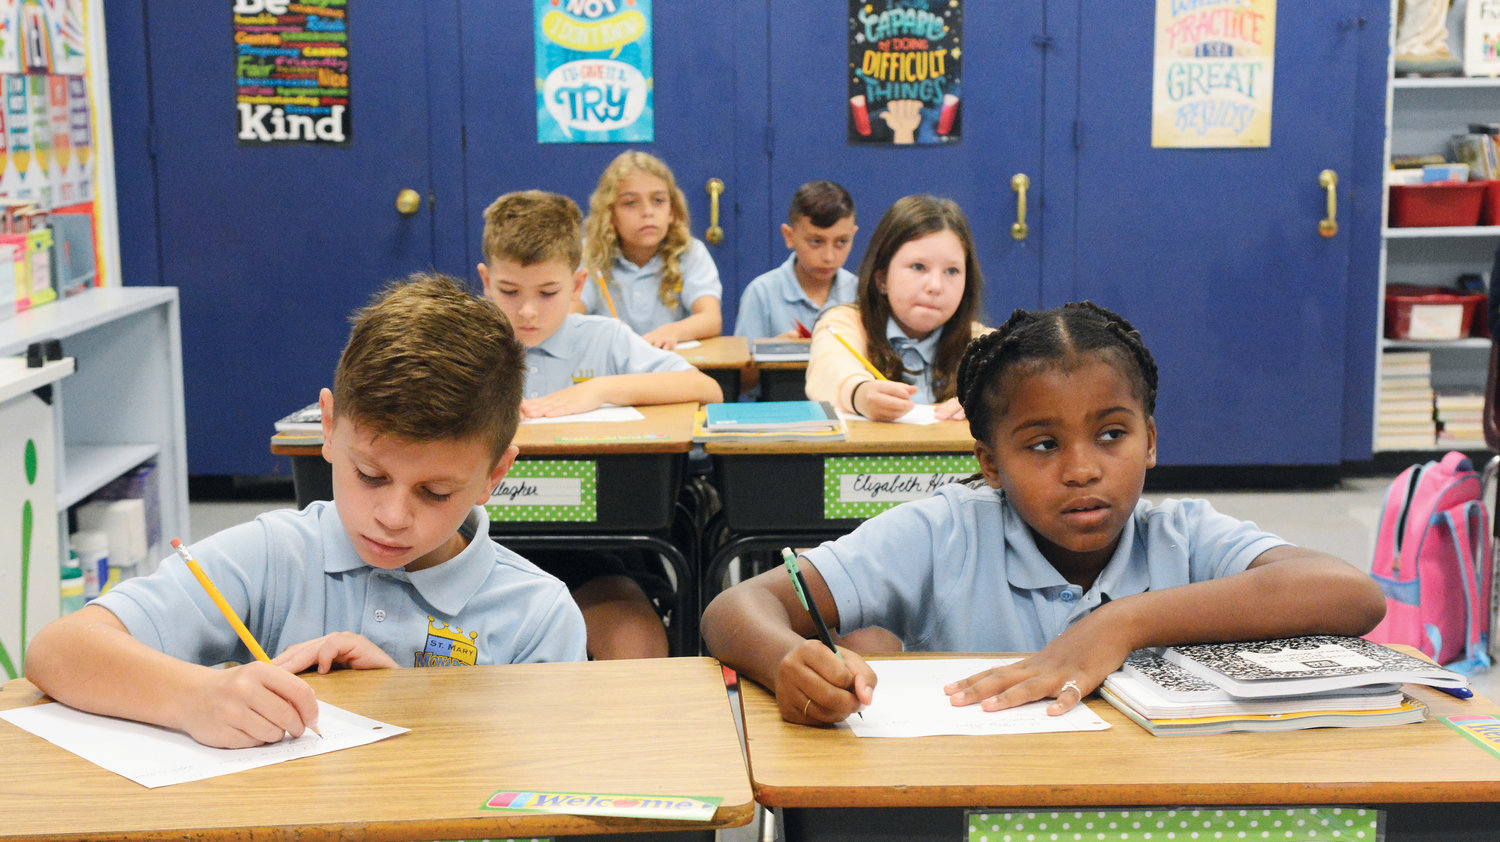 Students got right back to learning Sept. 6, the first day of classes at St. Mary’s School in Fishkill. Fourth-graders quickly put their pencils to paper.